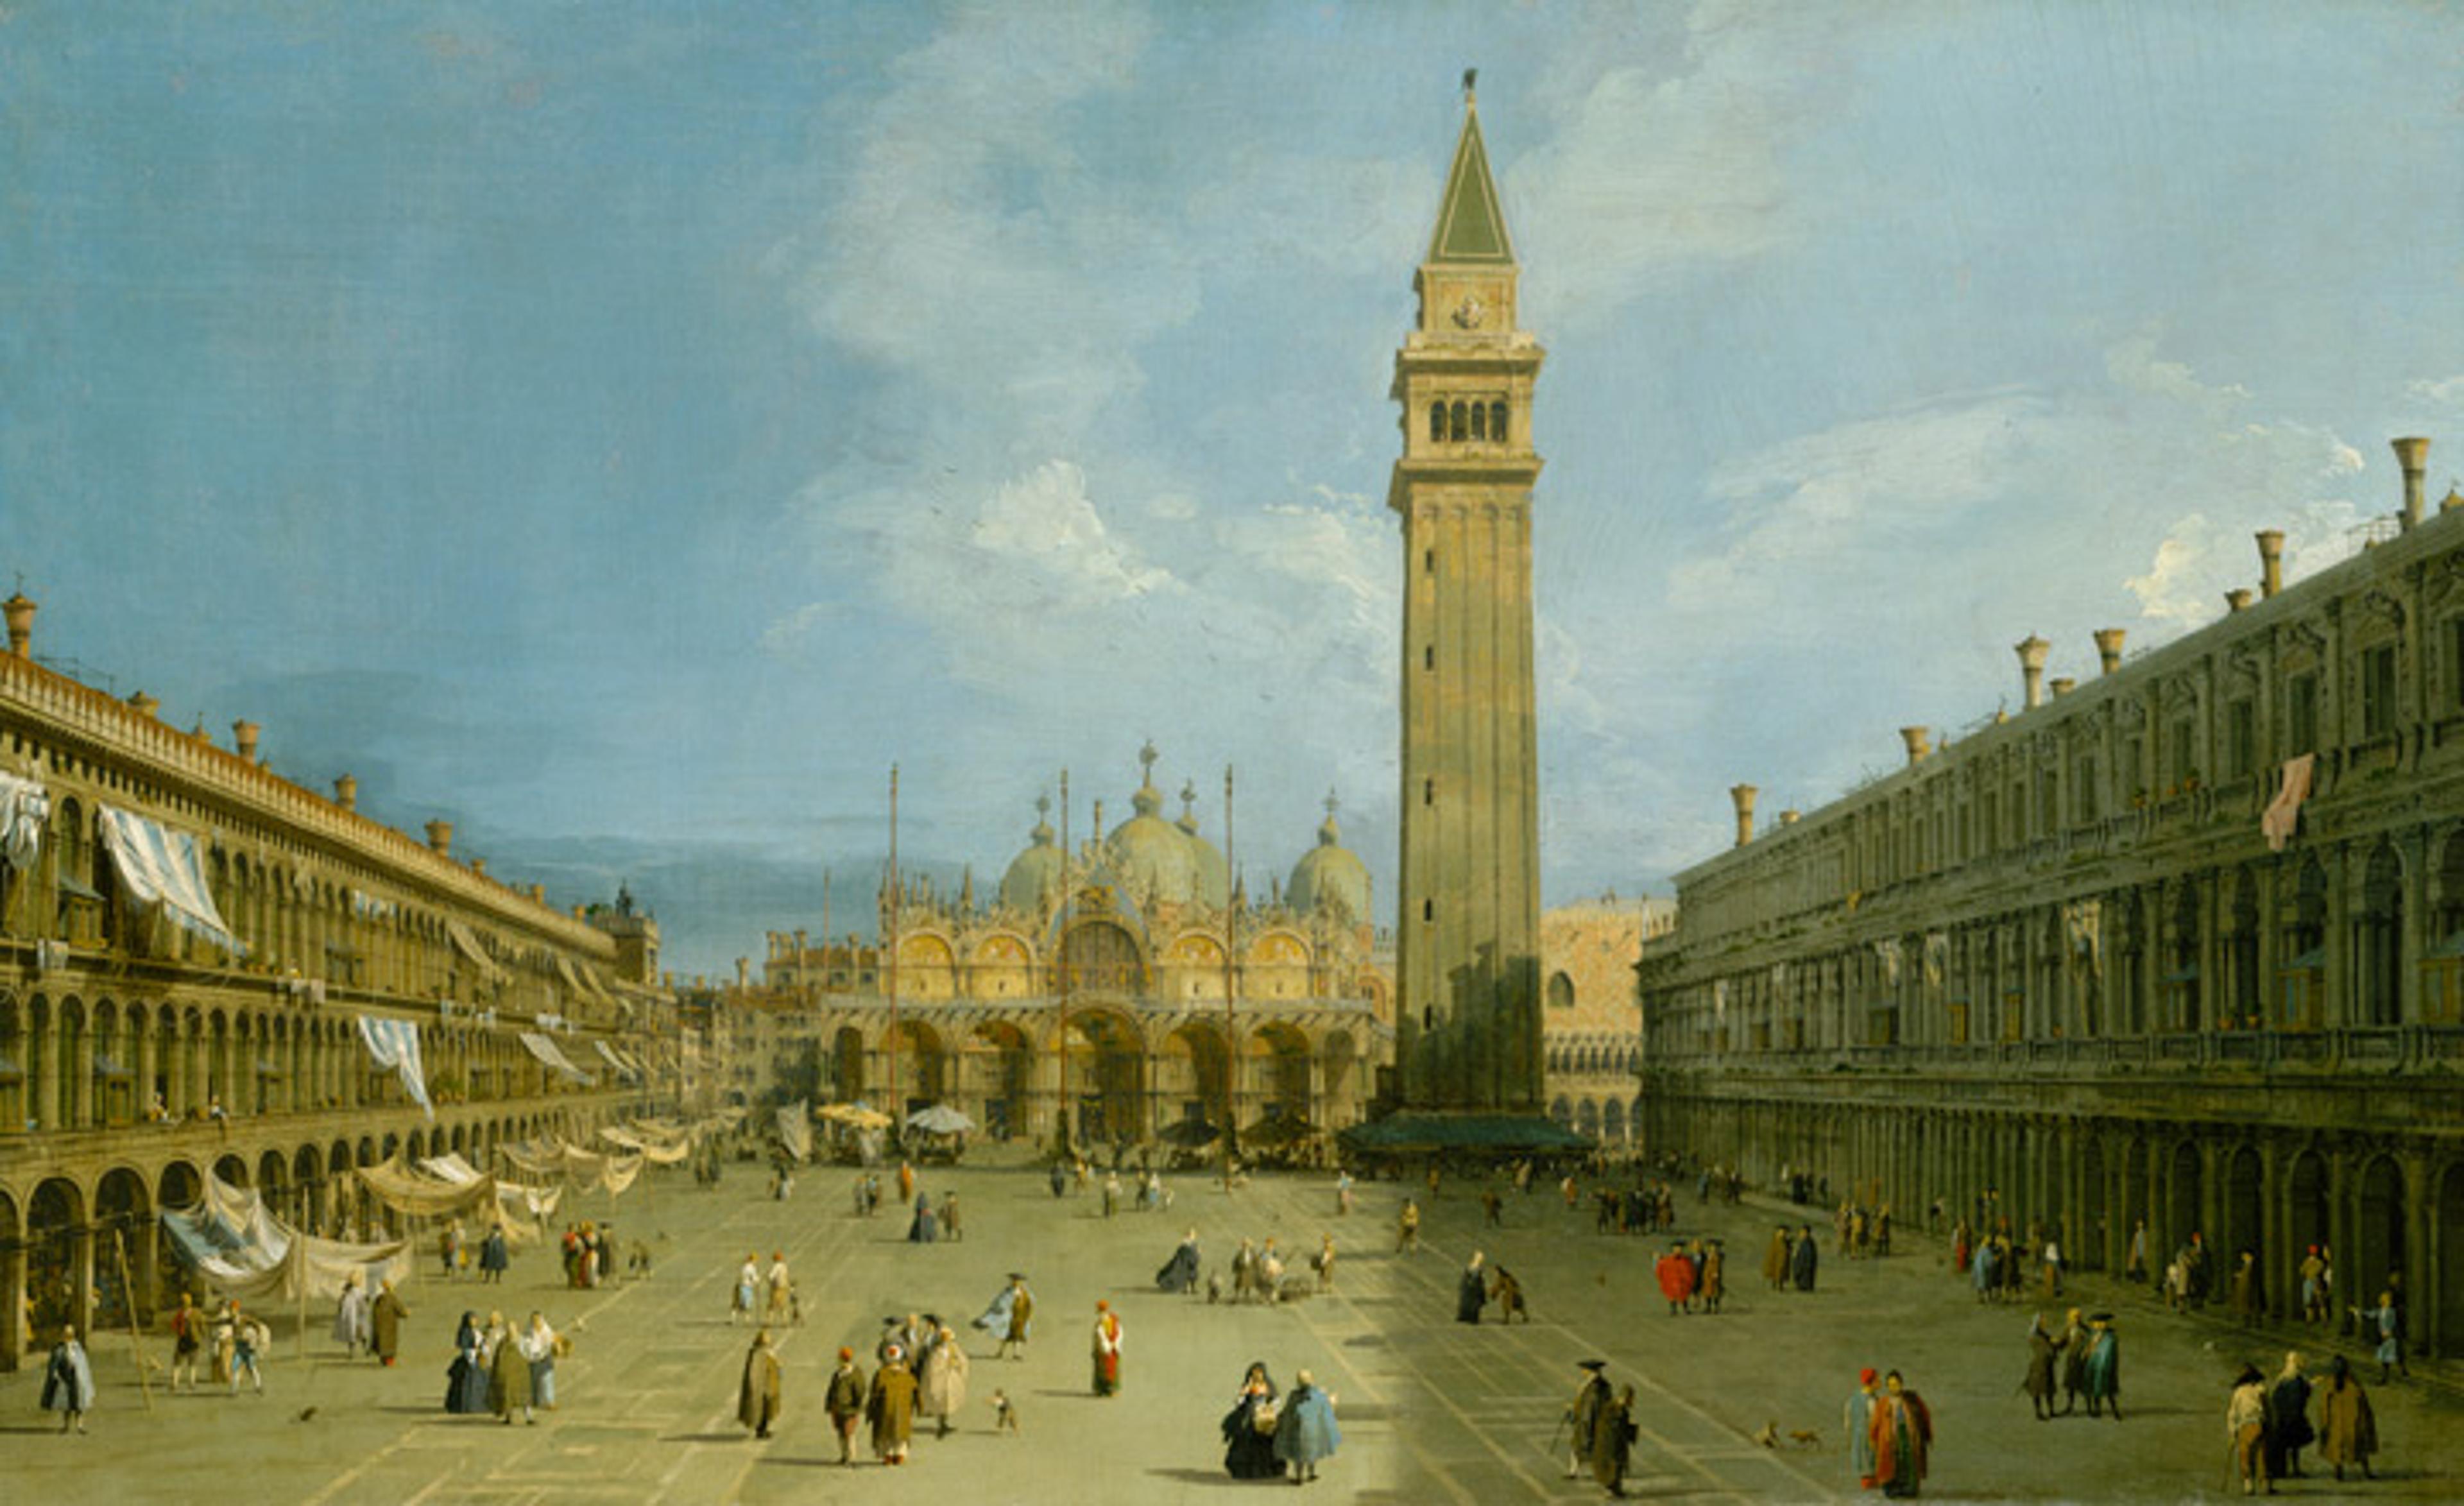 An 18th-century painting of the Piazza San Marco in Venice